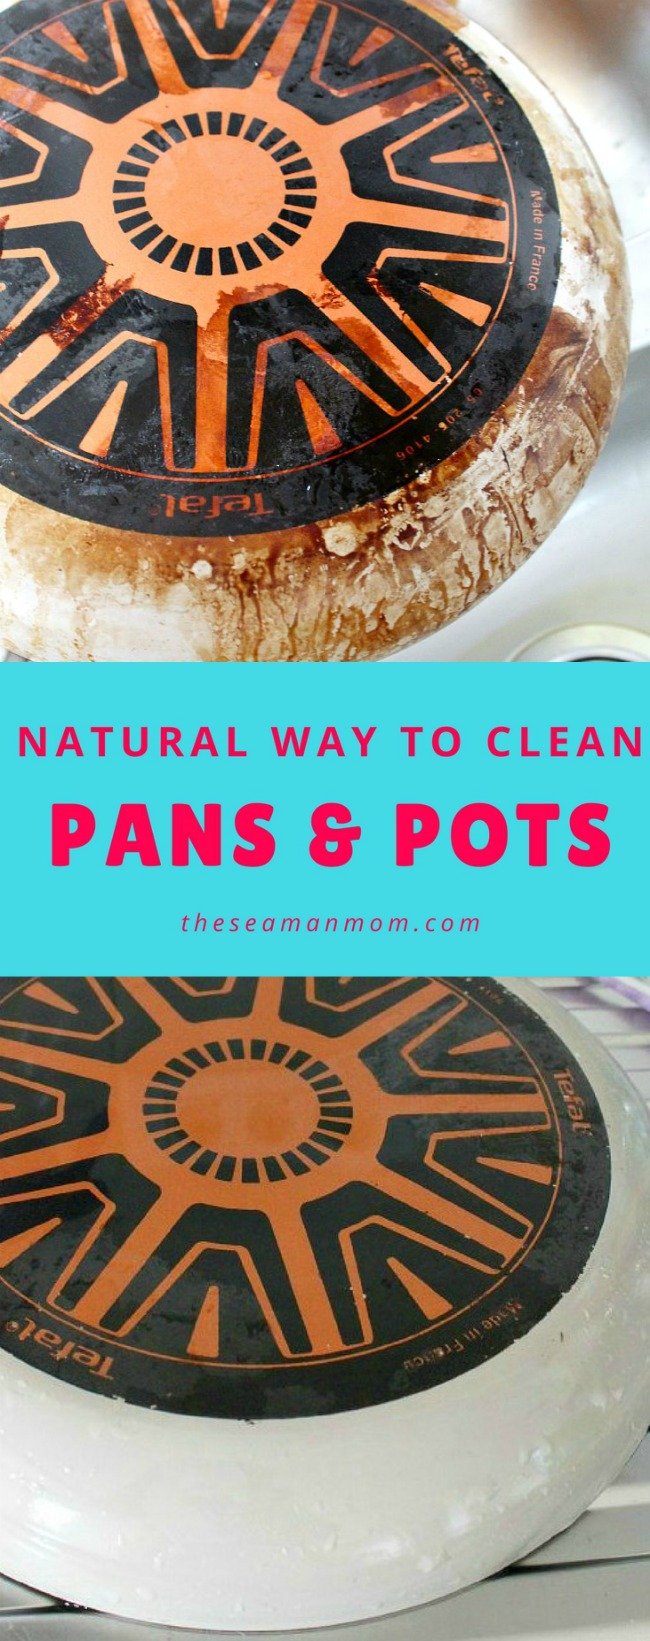 Natural way to clean pans and pots